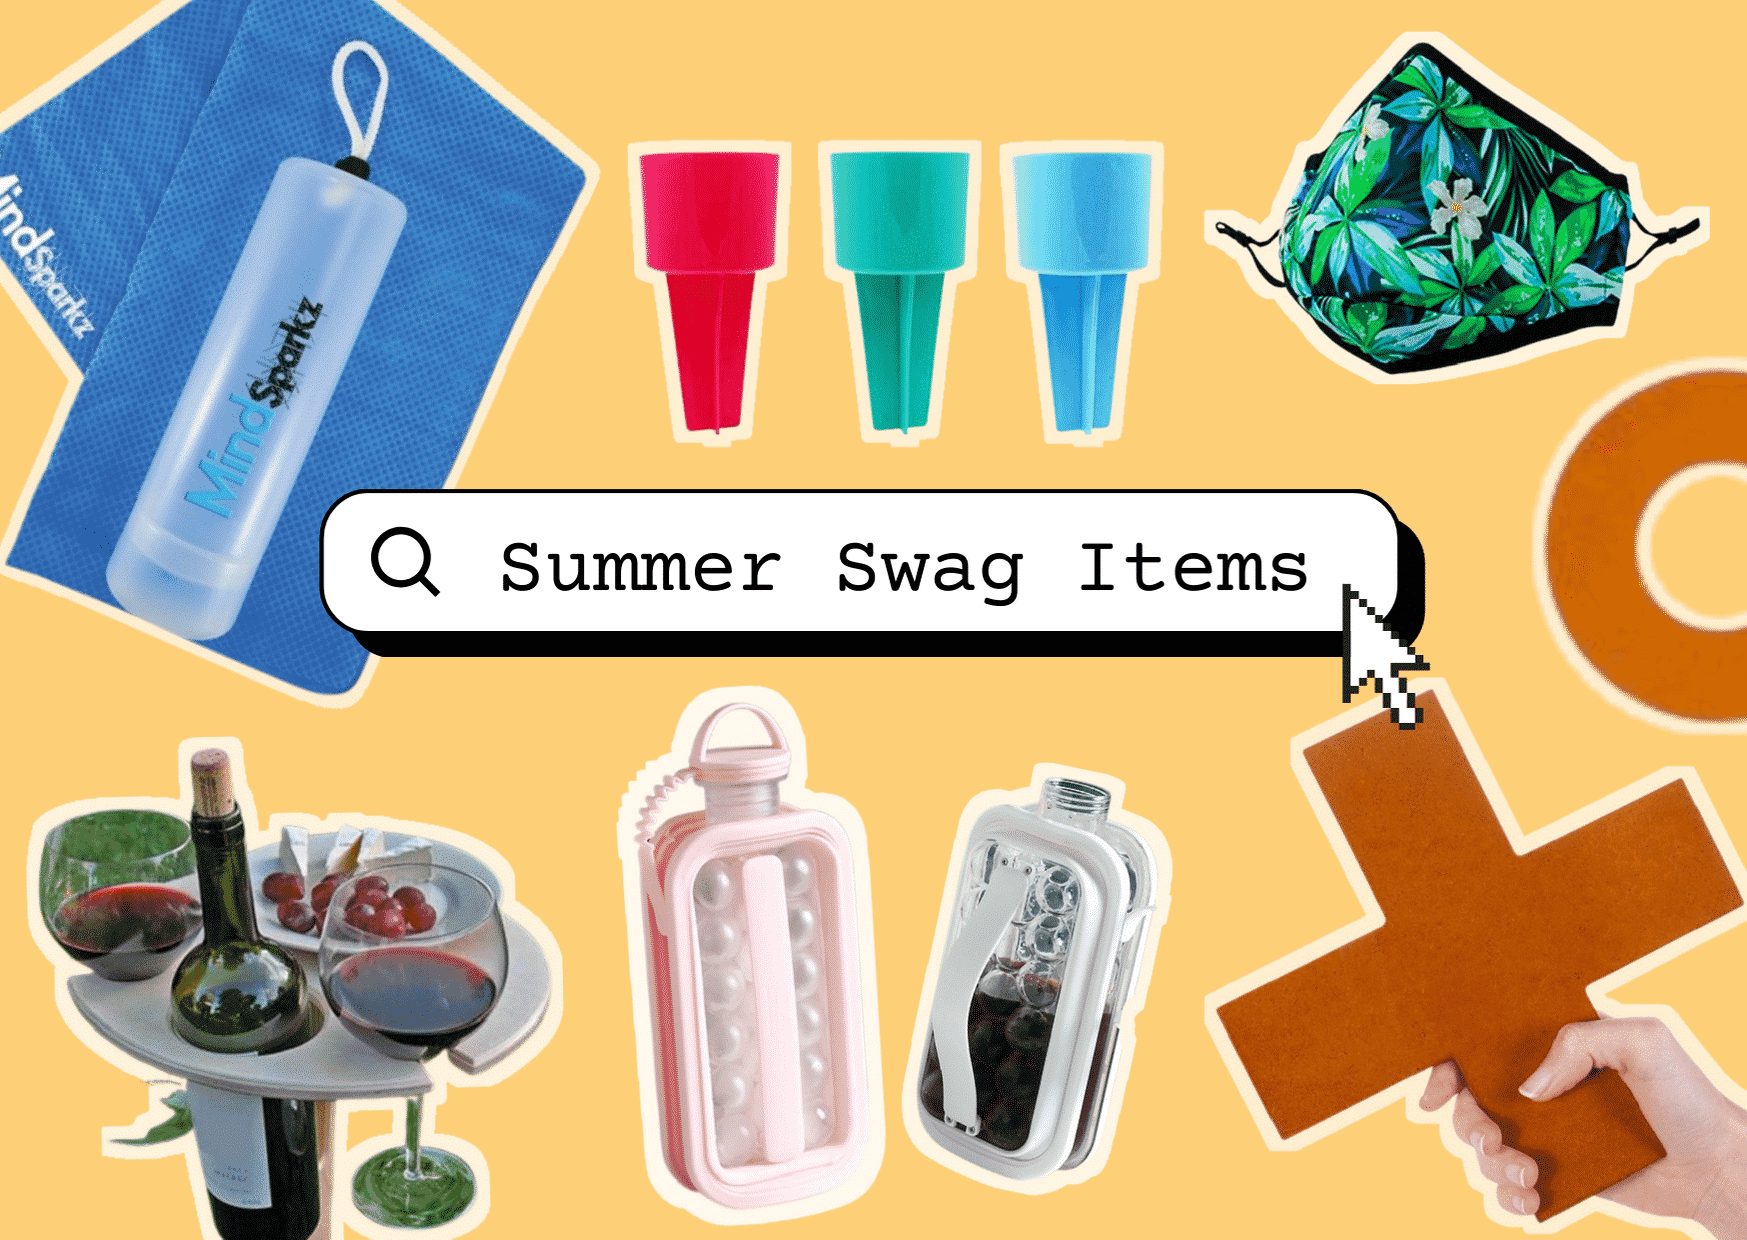 Top 7 Summer Swag Items Trendy Promo Ideas for Brand Managers